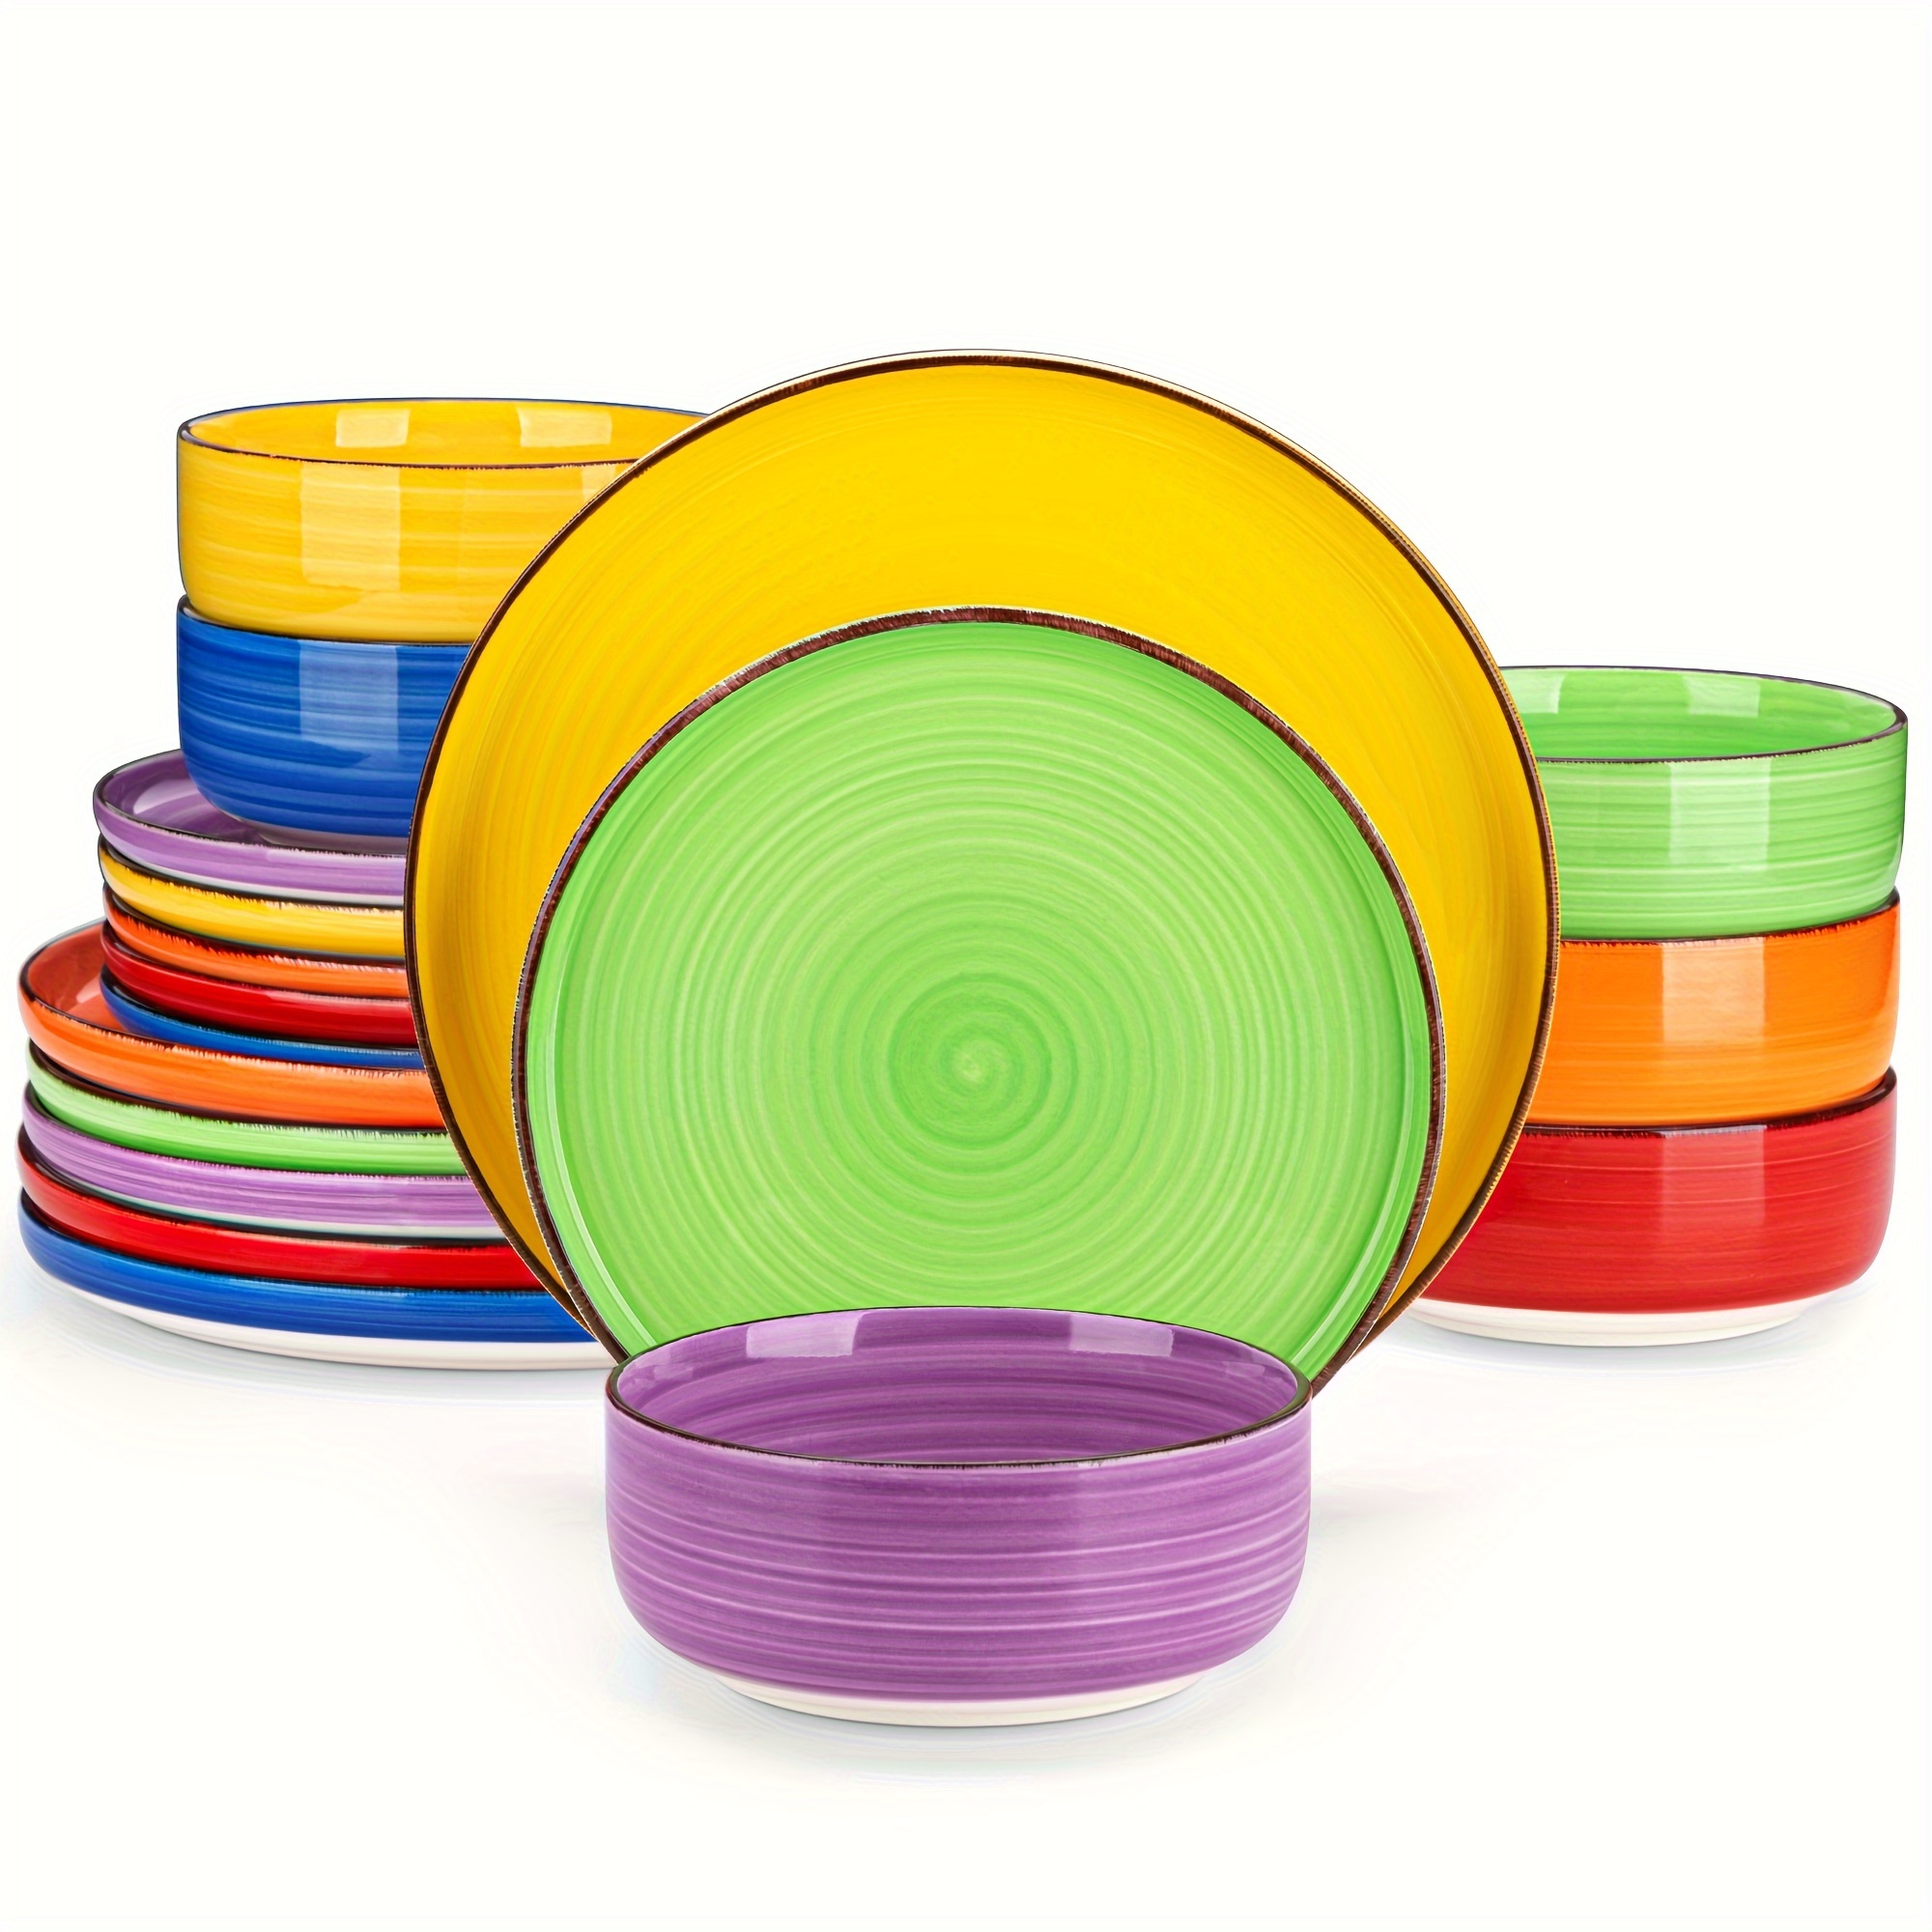 

18 Pcs Dinner Set Stoneware Colorful Hand Painted Tableware With Dinner Plate Dessert Plate & Cereal Bowl Service For 6